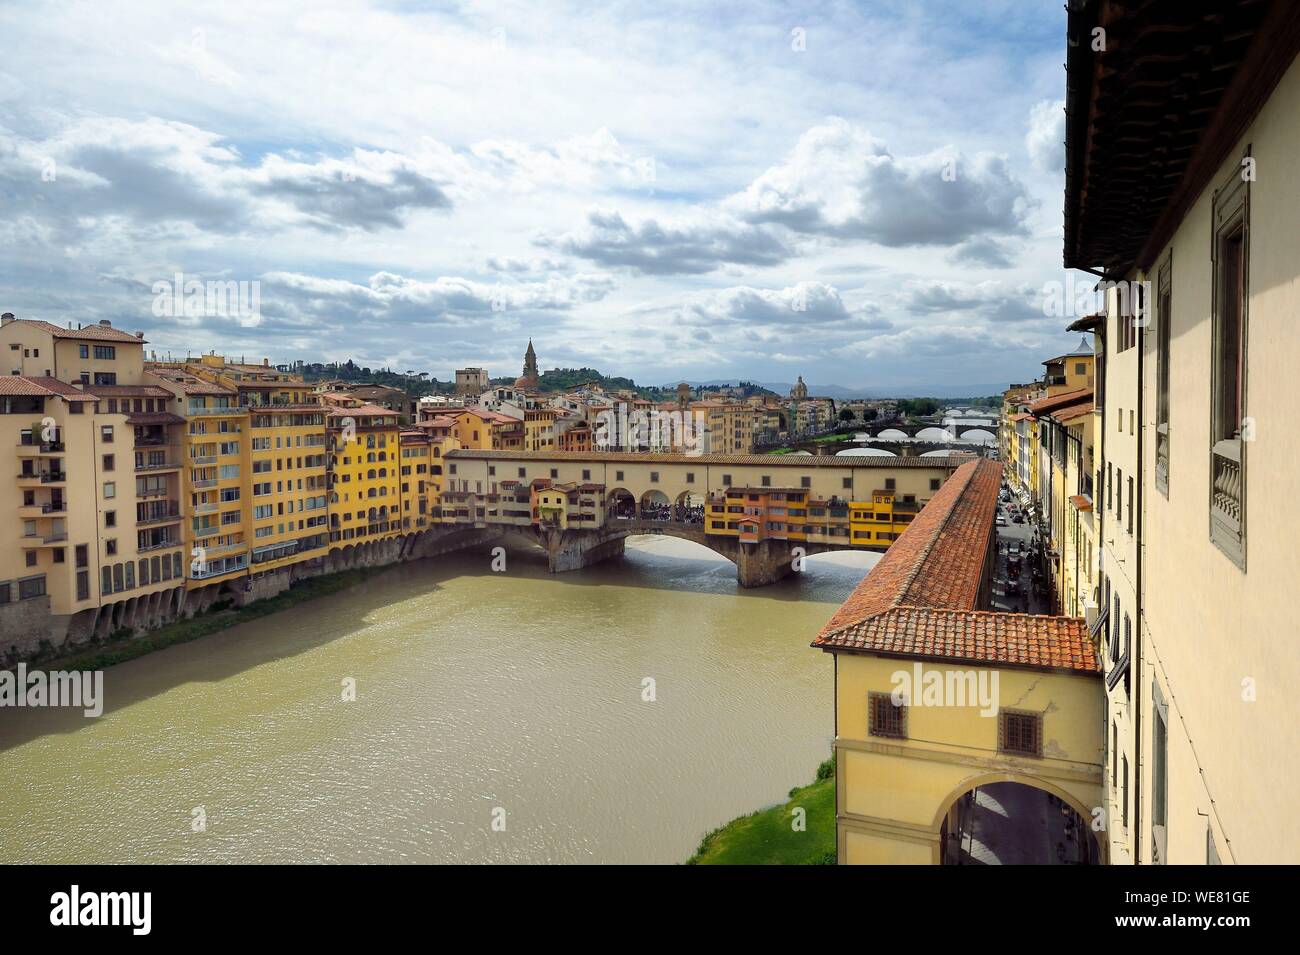 Italy, Tuscany, Florence, listed as World Heritage by UNESCO, the Ponte Vecchio on the Arno River seen from the Galleria degli Uffizi (Uffizi Gallery), the Vasari Corridor, protected passage covered by the Medici between Palazzo Vecchio and Palazzo Pitti, when crossing the Arno on the Ponte Vecchio Stock Photo